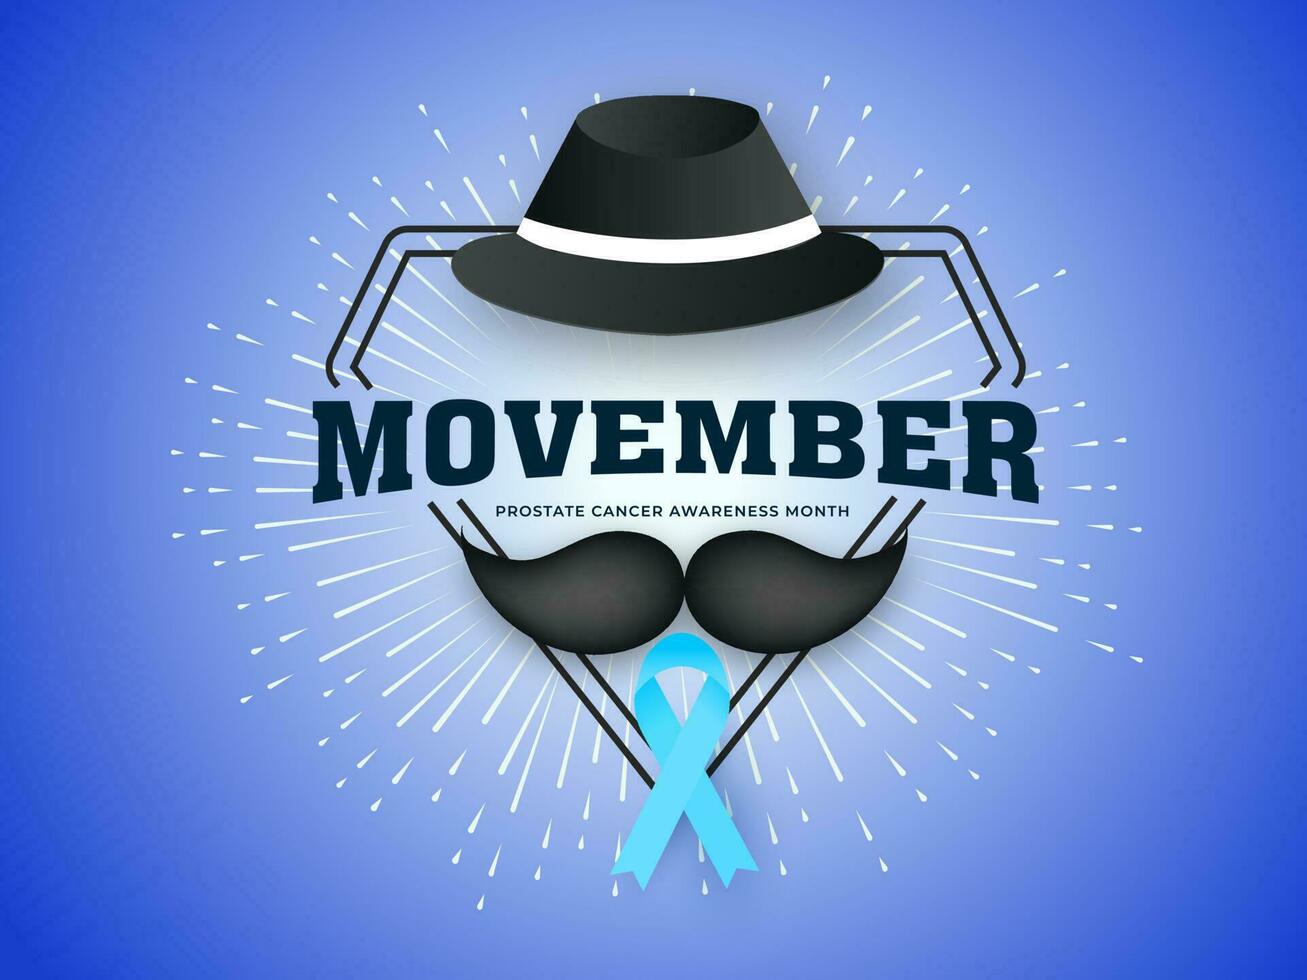 Movember banner or poster design with fedora hat, mustache and Aids ribbon illustration on blue rays background for Prostate Cancer Awareness Month concept. vector